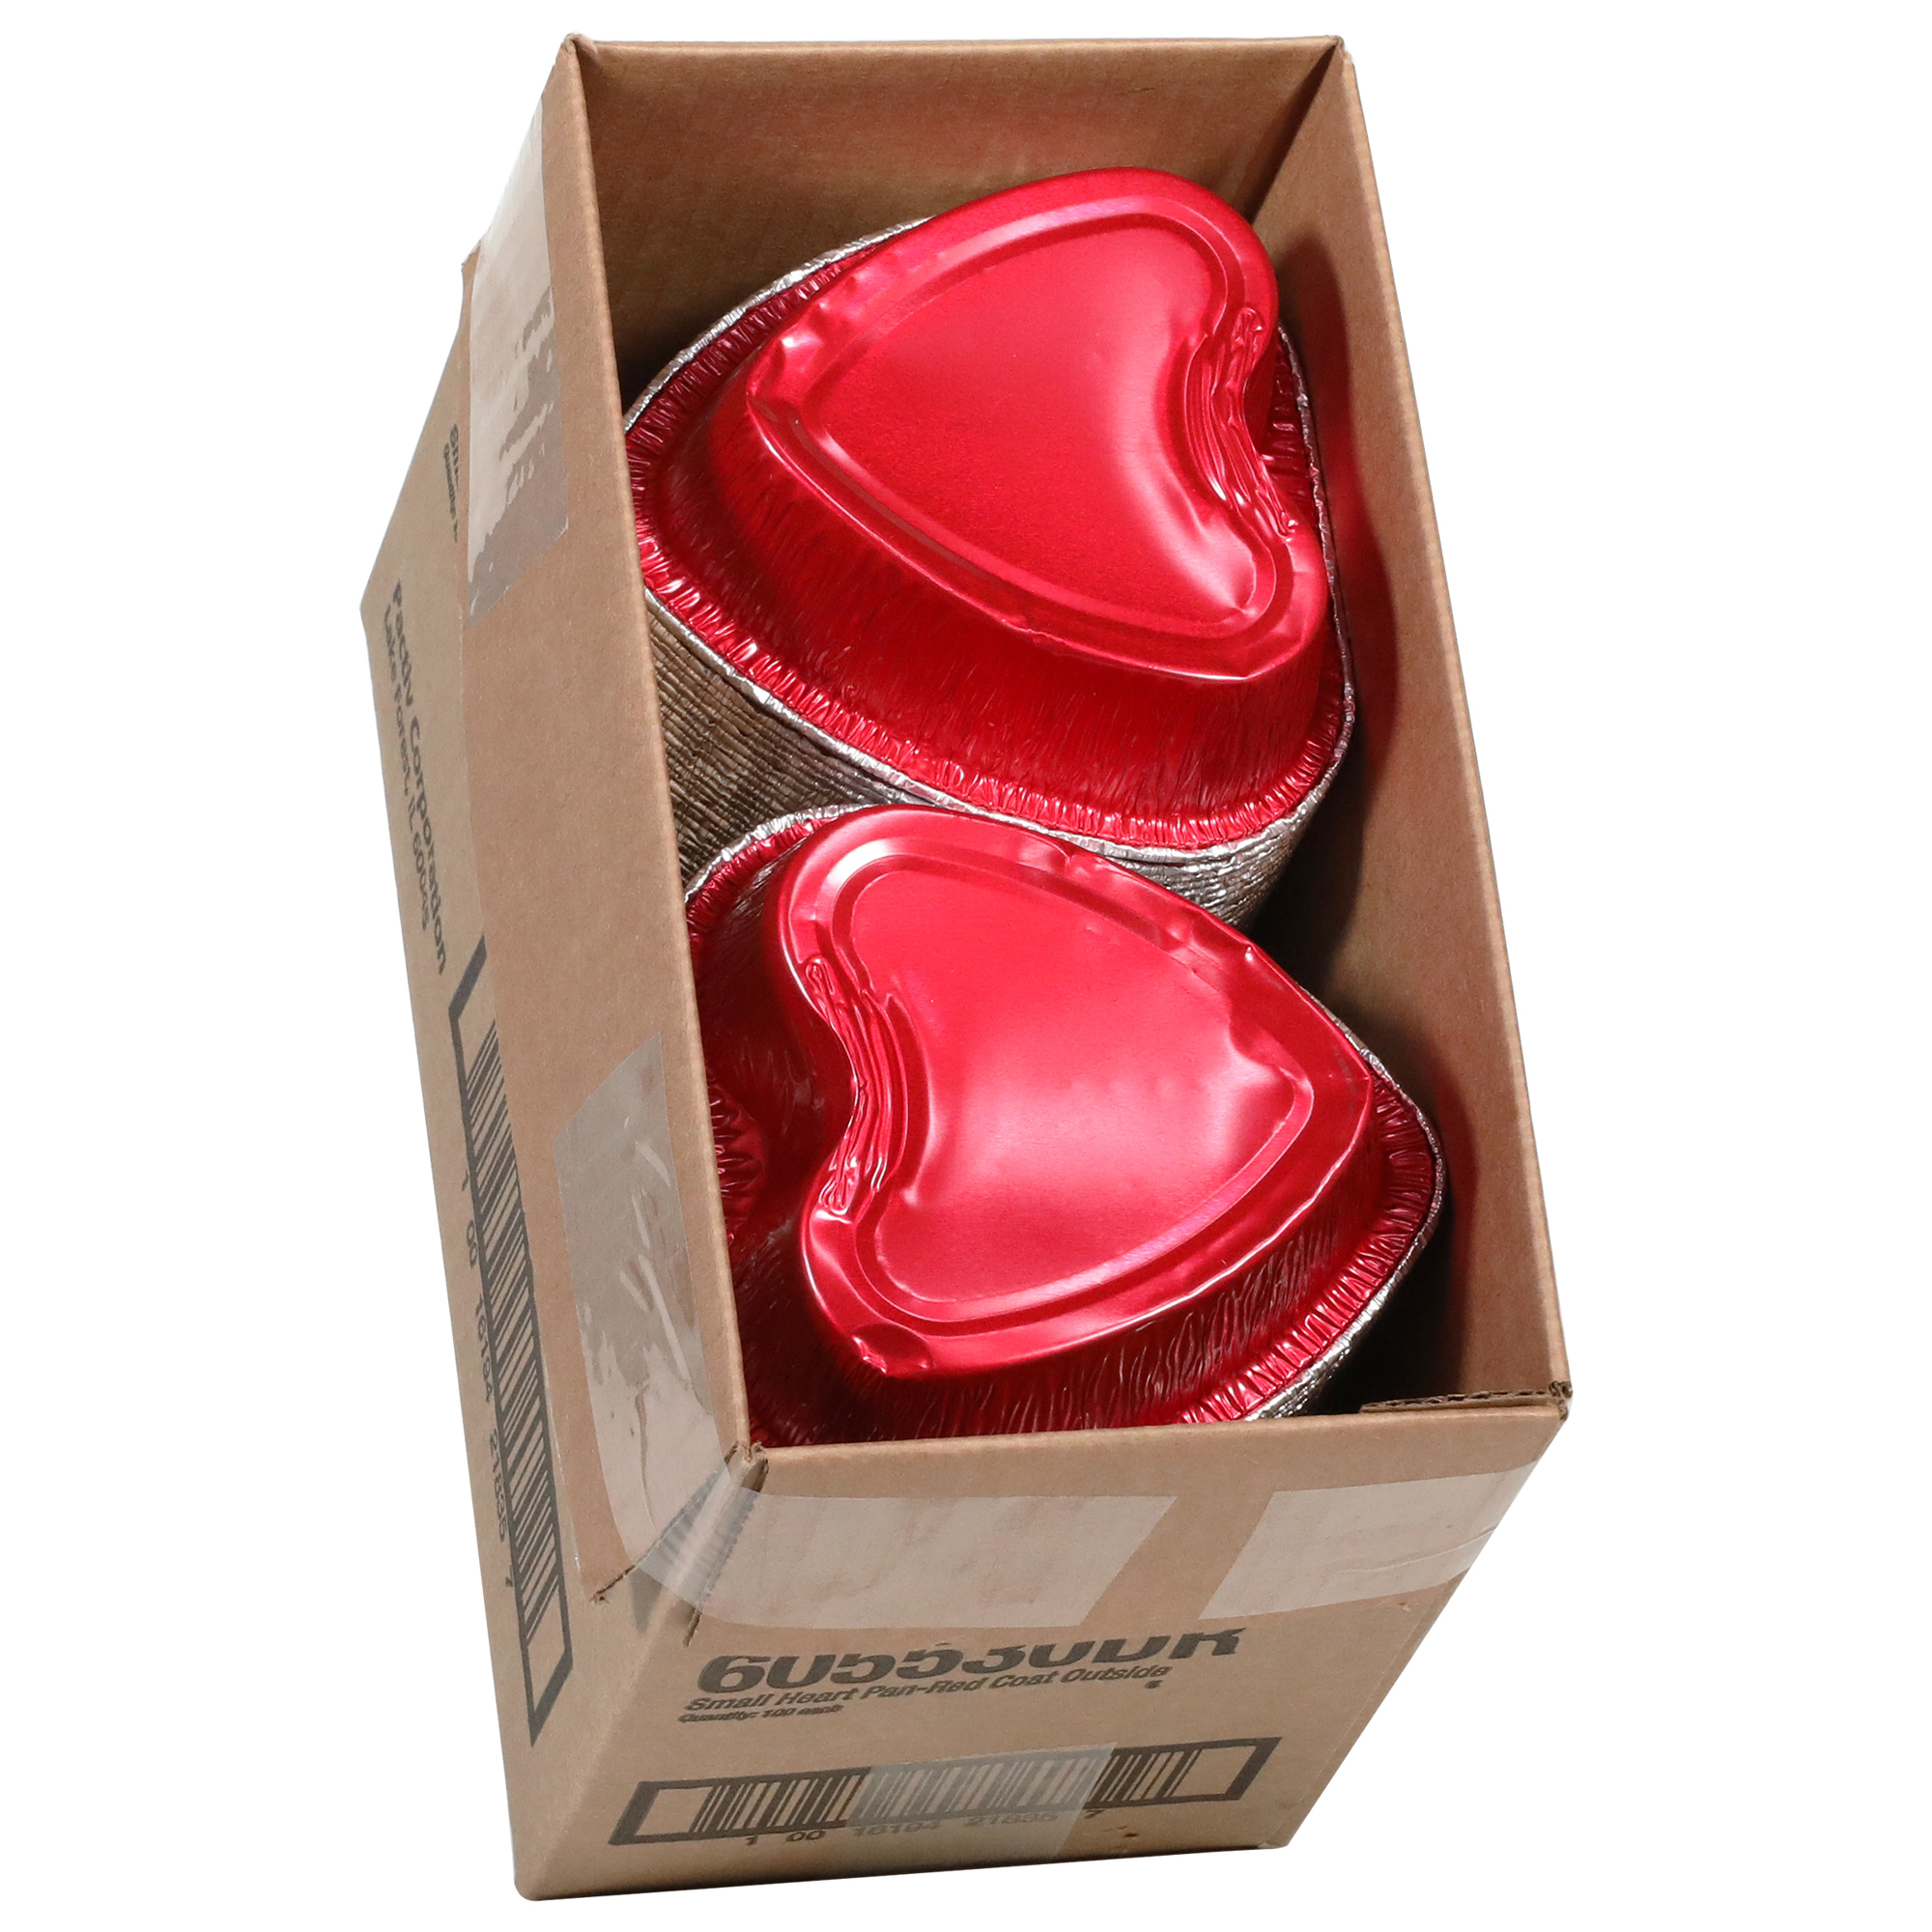 Heart box, red and silver, 8 ounces